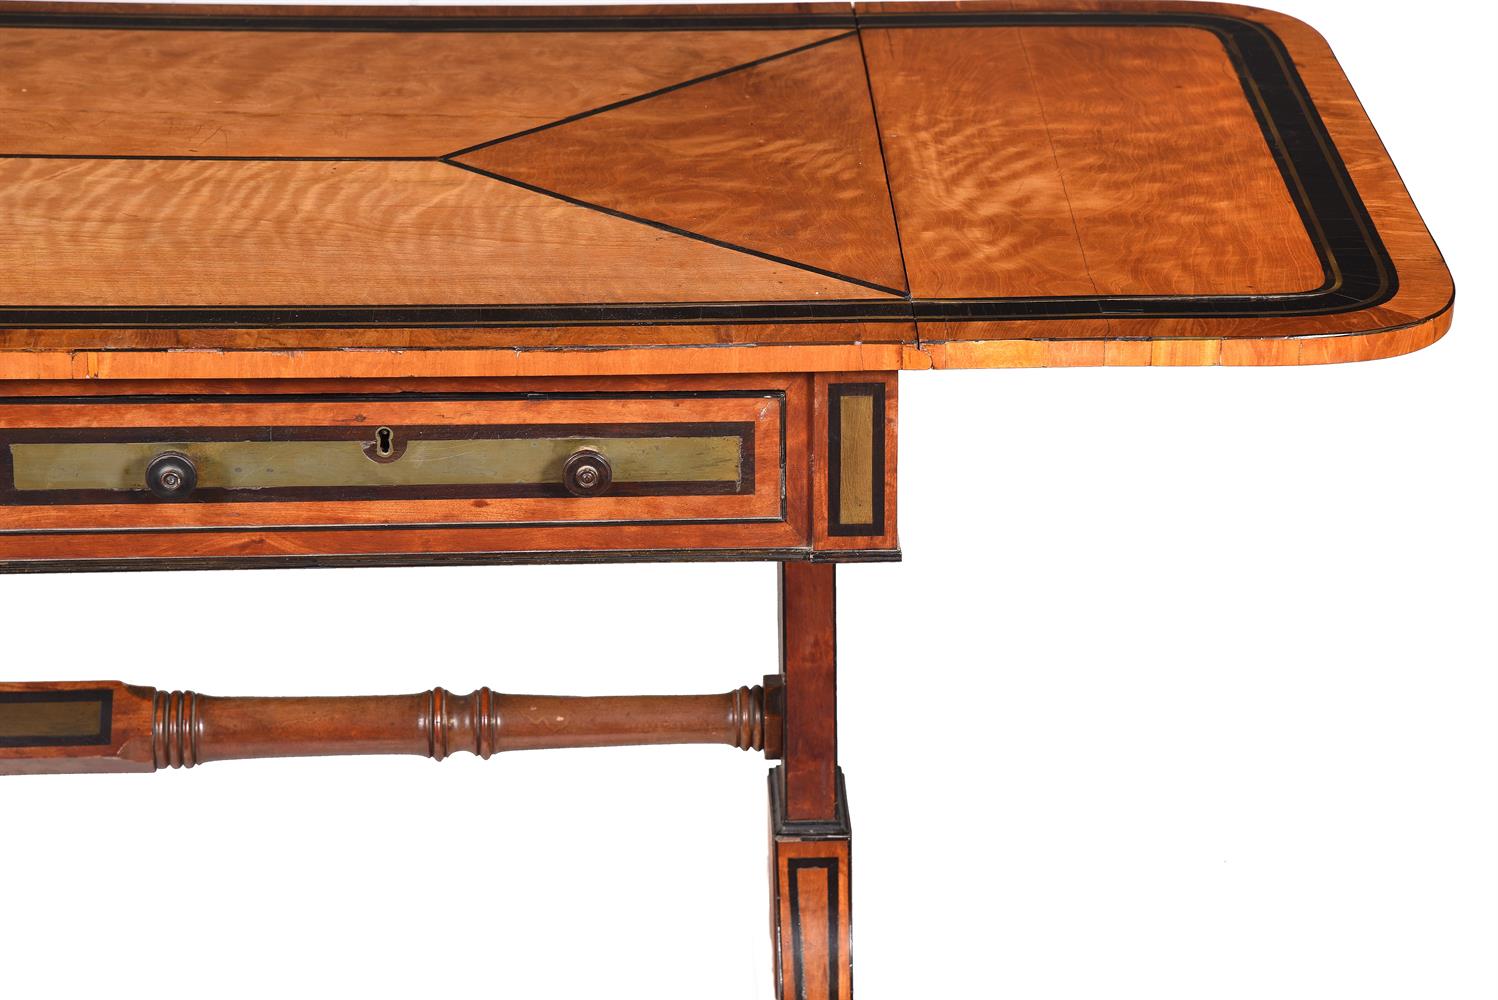 Y A REGENCY SATINWOOD, EBONY AND BRASS INLAID SOFA TABLE, CIRCA 1815 - Image 6 of 7